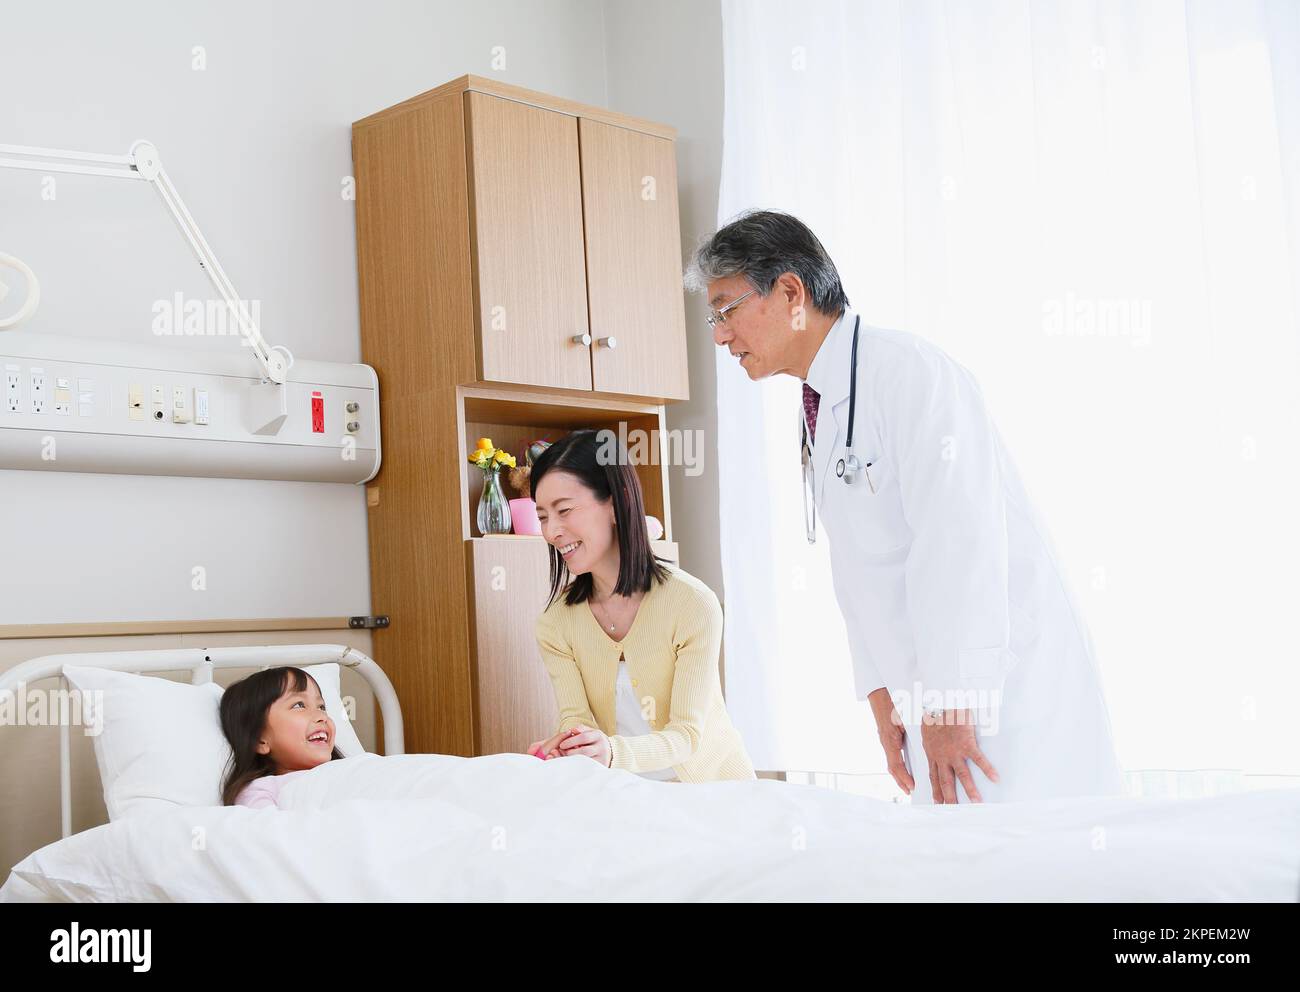 Japanese girl being examined by a doctor in a hospital room Stock Photo